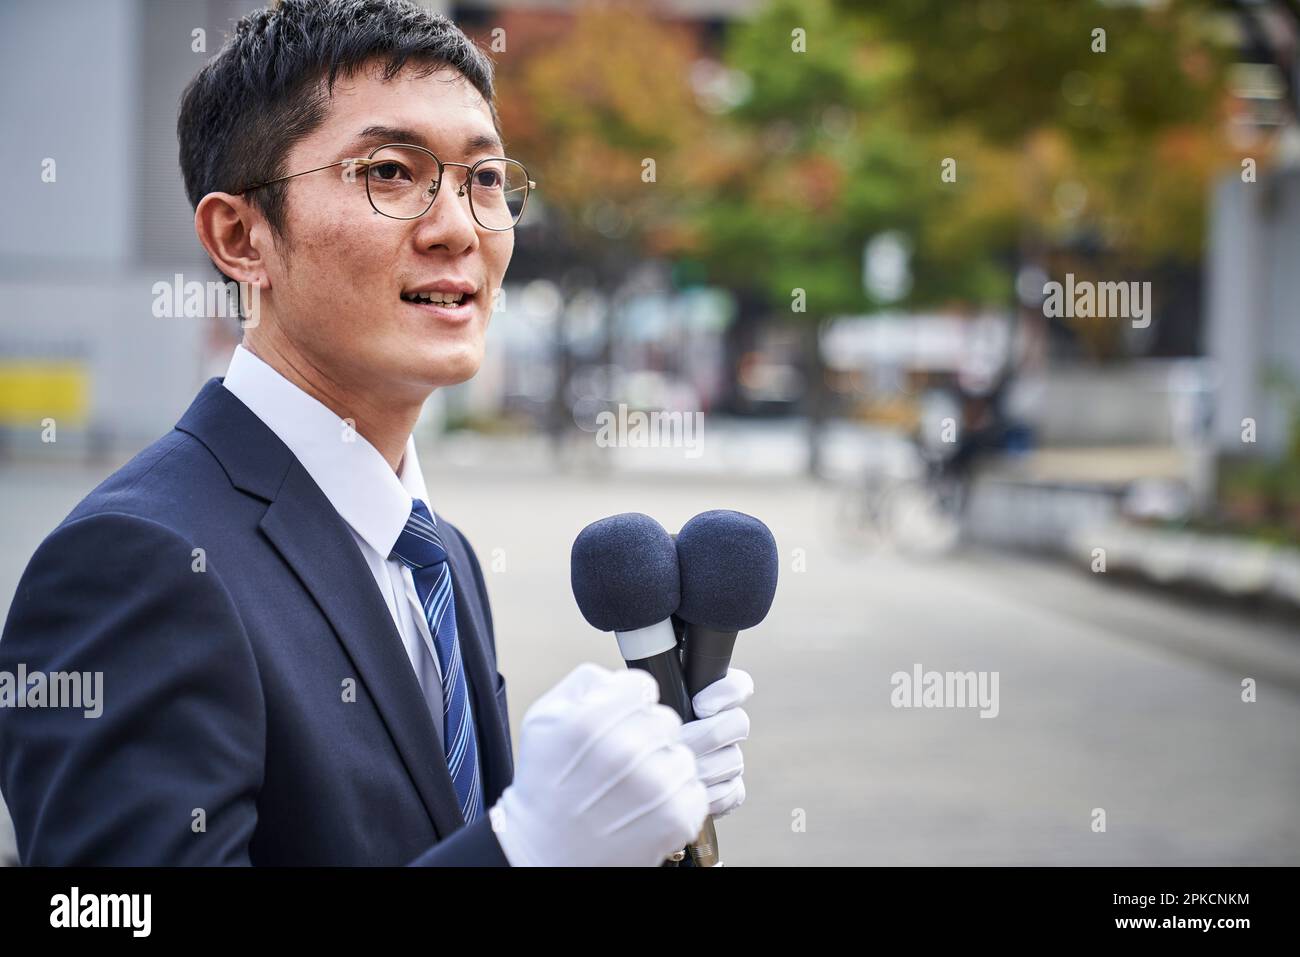 A man in a suit giving a speech in the city Stock Photo